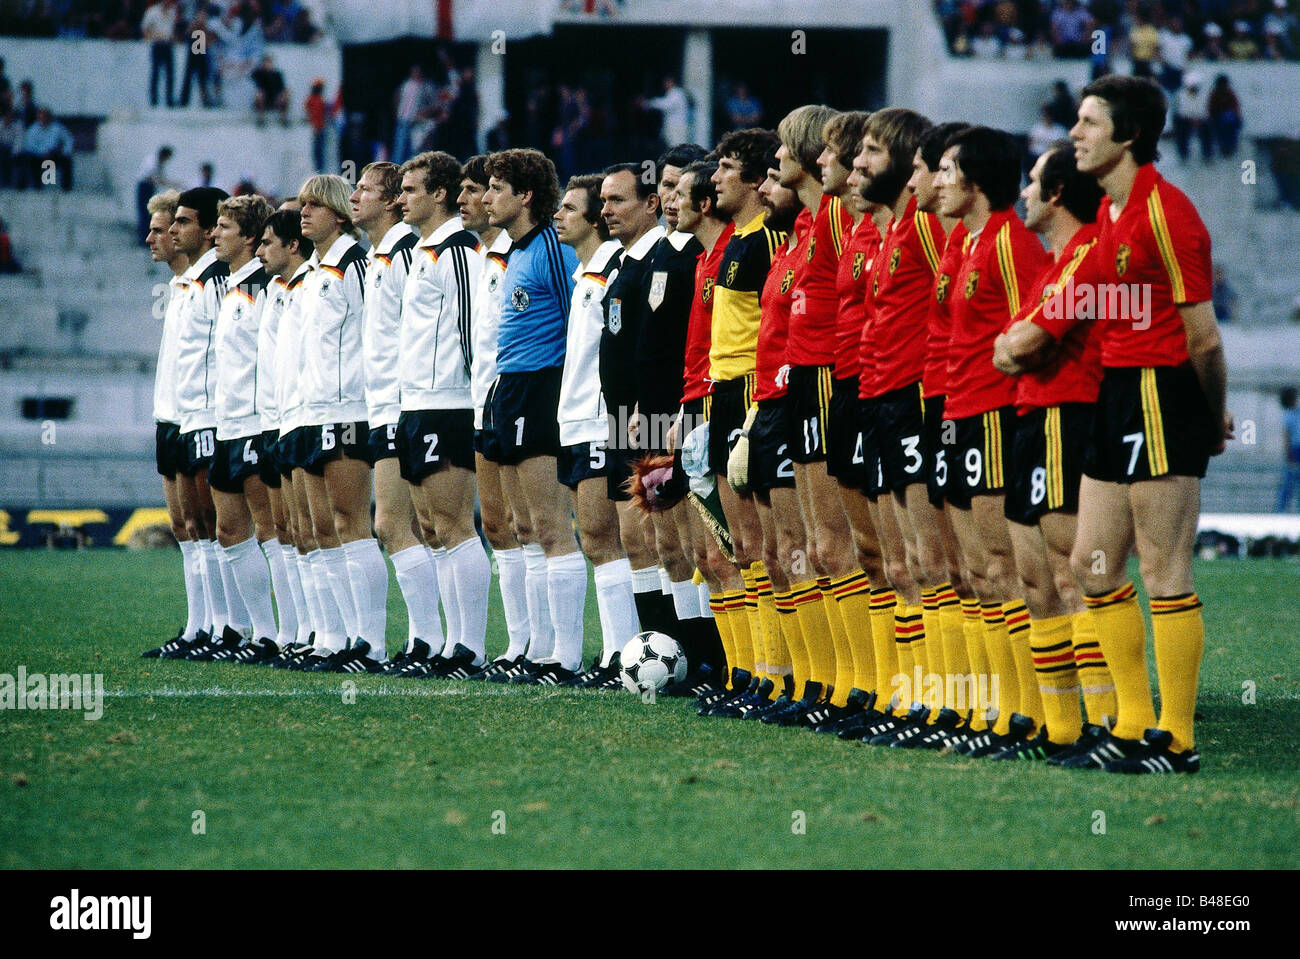 Sport / Sports, soccer, football, European championship, EURO 1980, German and Belgian national team and referee, group picture, final Germany against Belgium, 2:1 (1:0), Rome, Italy, 22.6.1980, Europe, championships, final round, final, match, historic, historical, 20th century, people, 1980s, Stock Photo